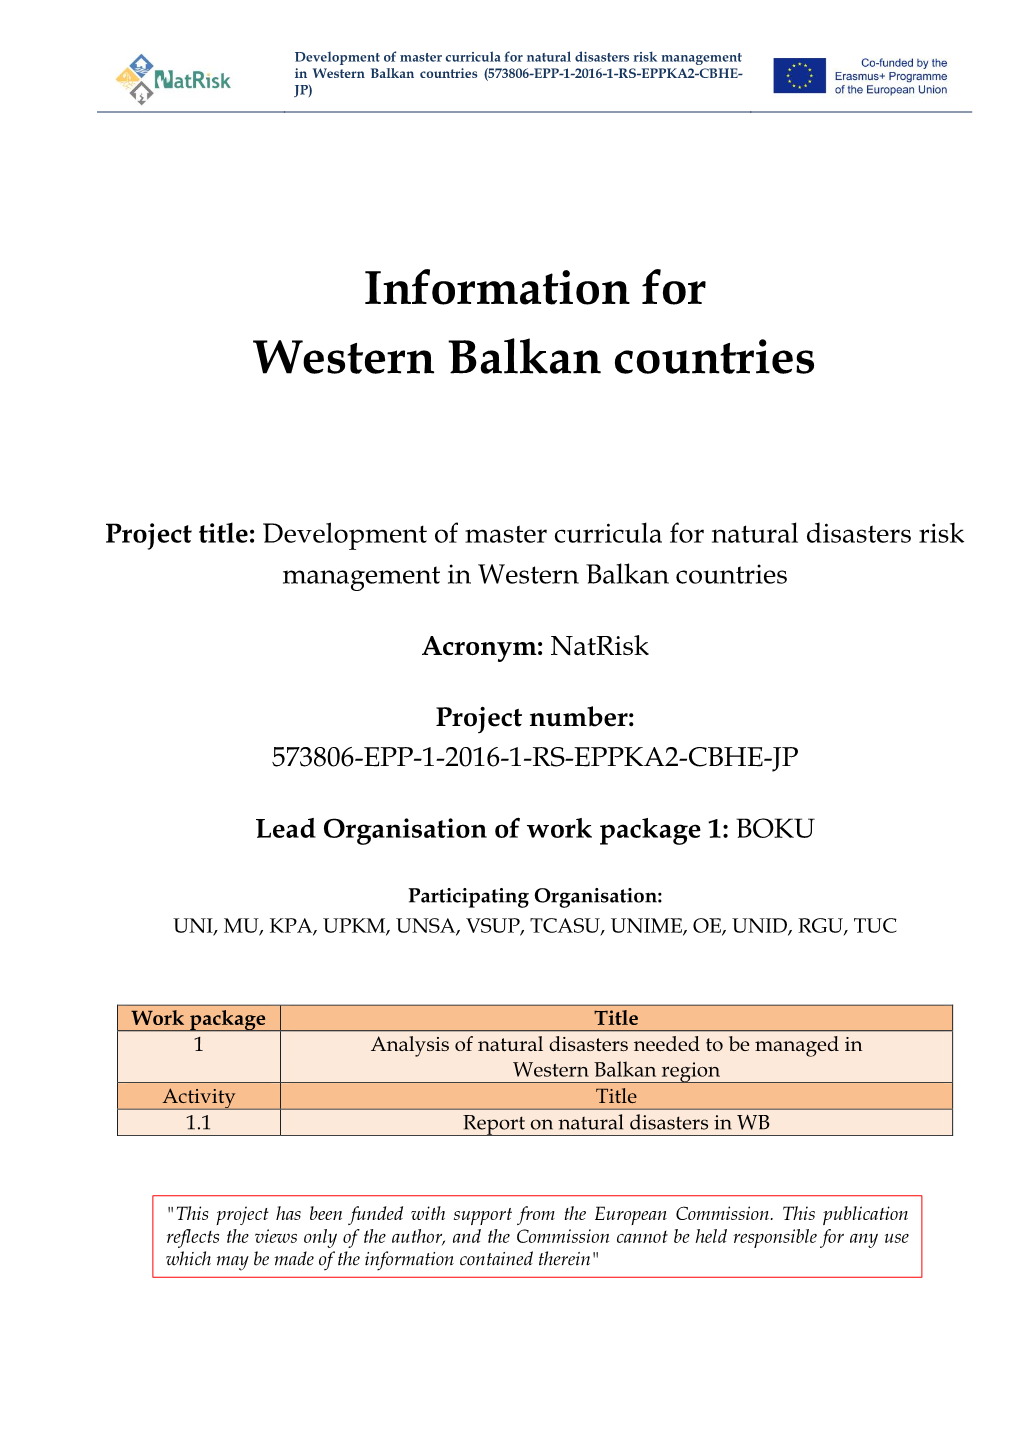 Information for Western Balkan Countries